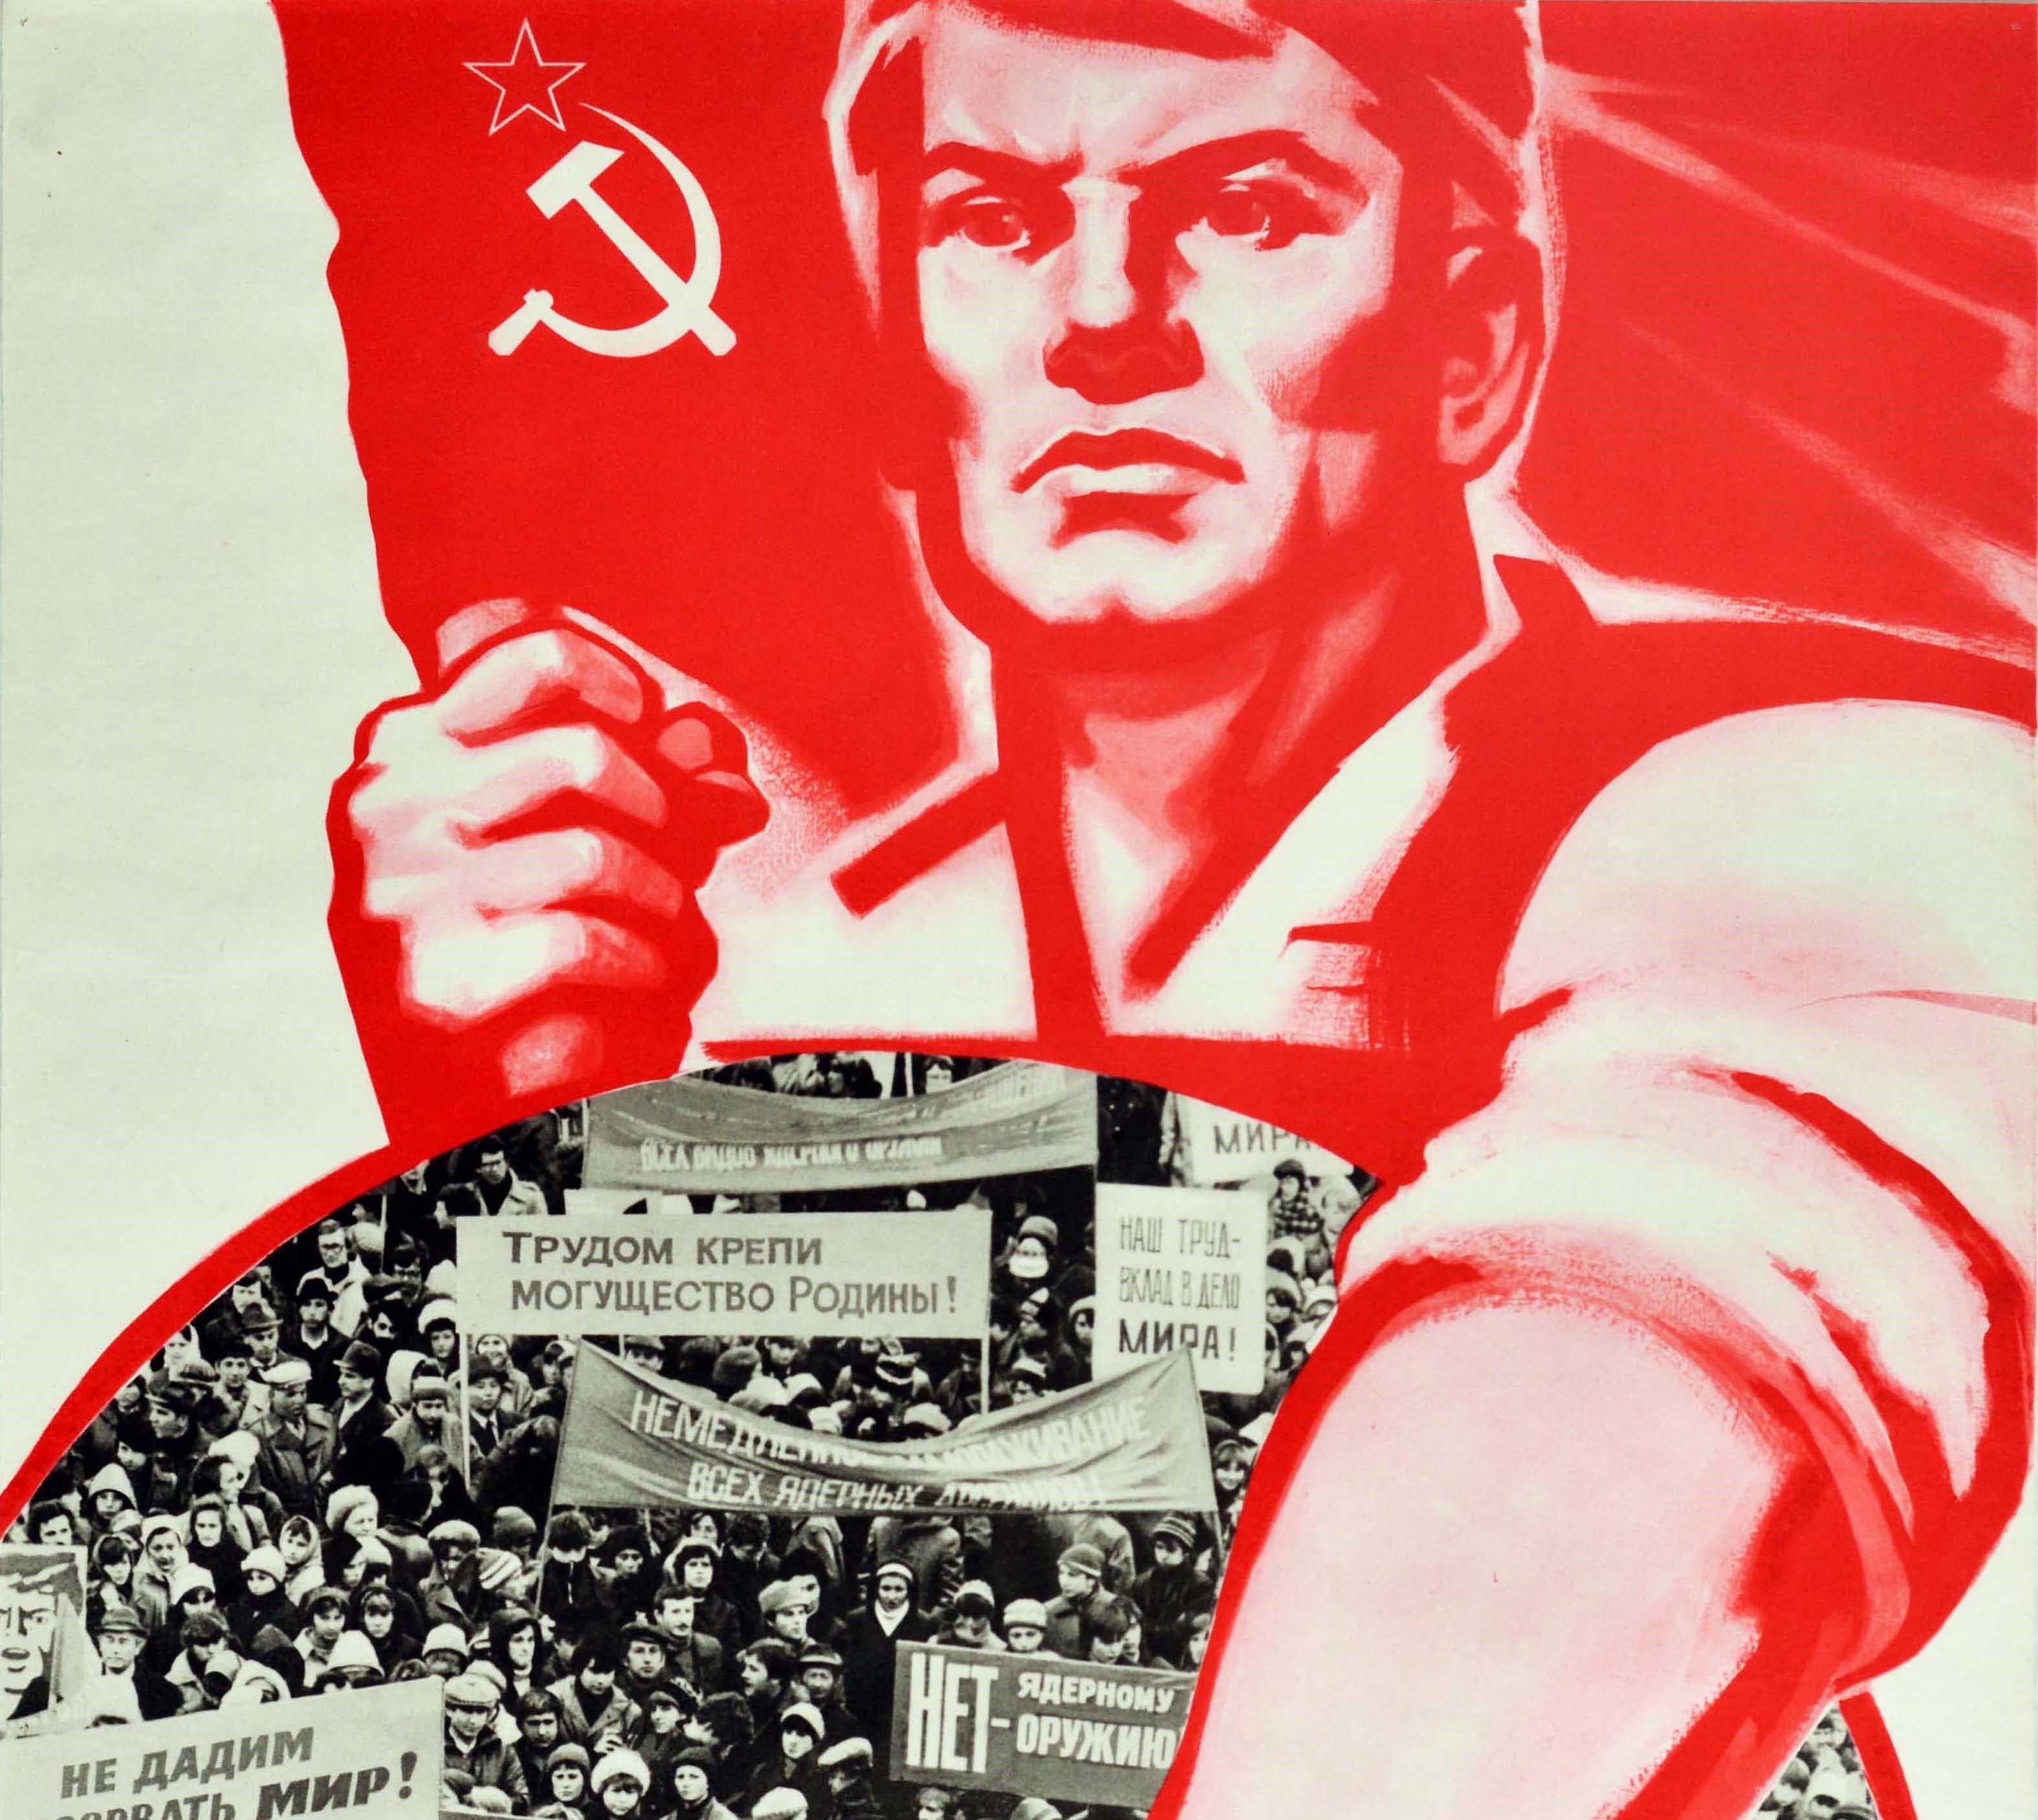 Original vintage Soviet propaganda poster against nuclear arms featuring an image of a man in red and white holding a red hammer and sickle star flag in a tight fist and pointing at the text in Russian that reads ????????? ??? ??????? ?????? ?? ????